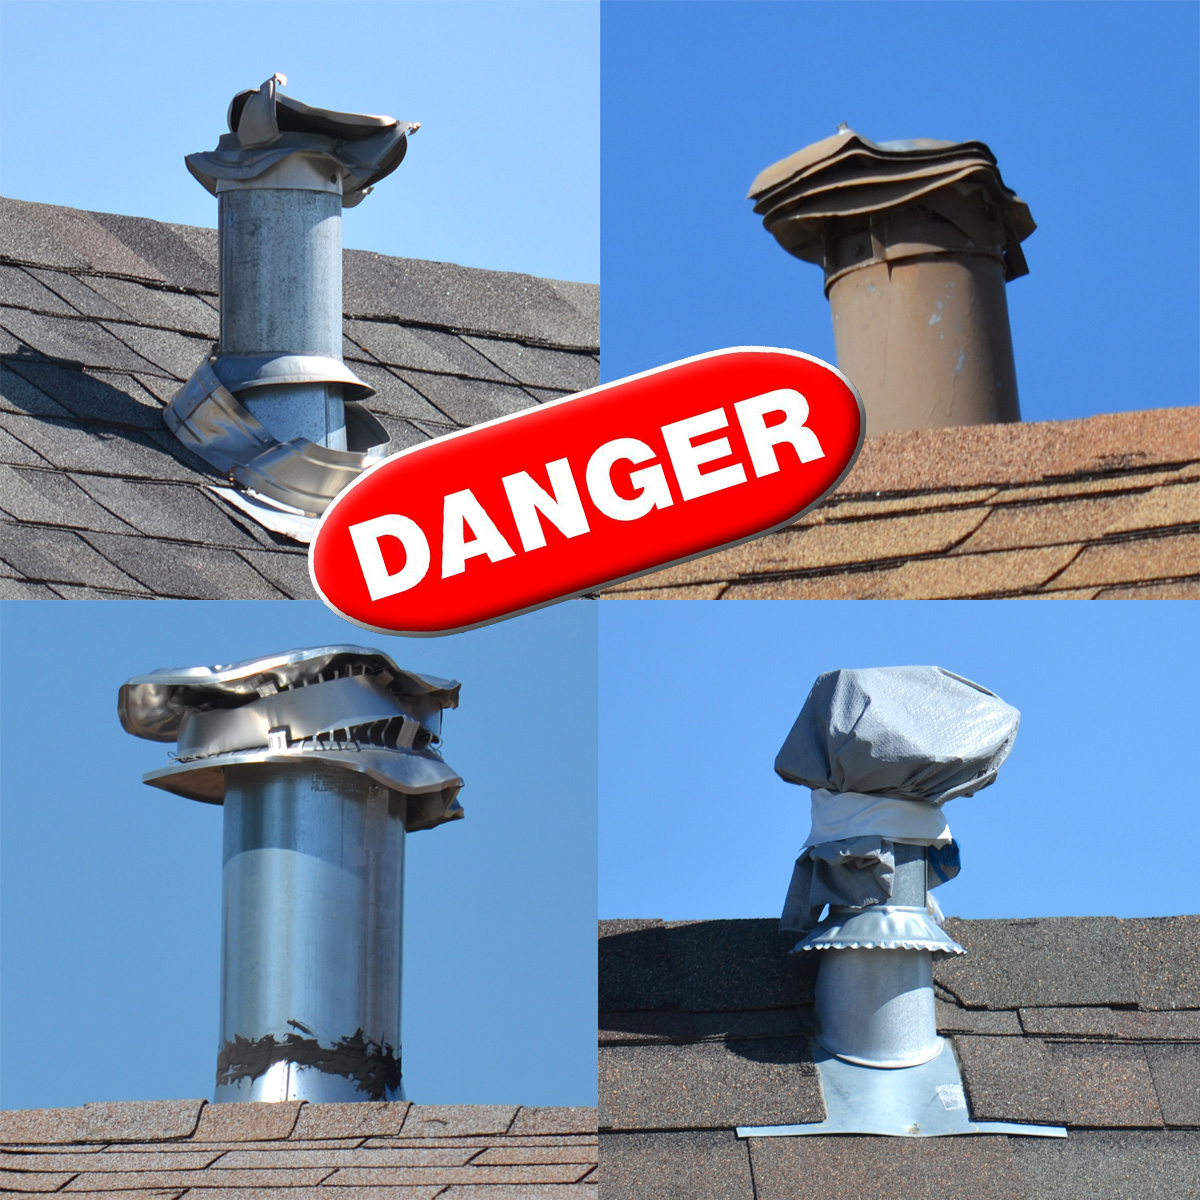 A photo of four damaged rooftop gas exhaust vents.  Damaged or covered gas exhaust vents prevent carbon monoxide from properly venting, and can lead to a deadly buildup of CO inside the home.  Carbon monoxide is colorless and odorless, and only a carbon monoxide detector can alert homeowners to its presence.  The Centers for Disease Control estimates 400 Americans die in their homes from unintentional carbon monoxide exposure.